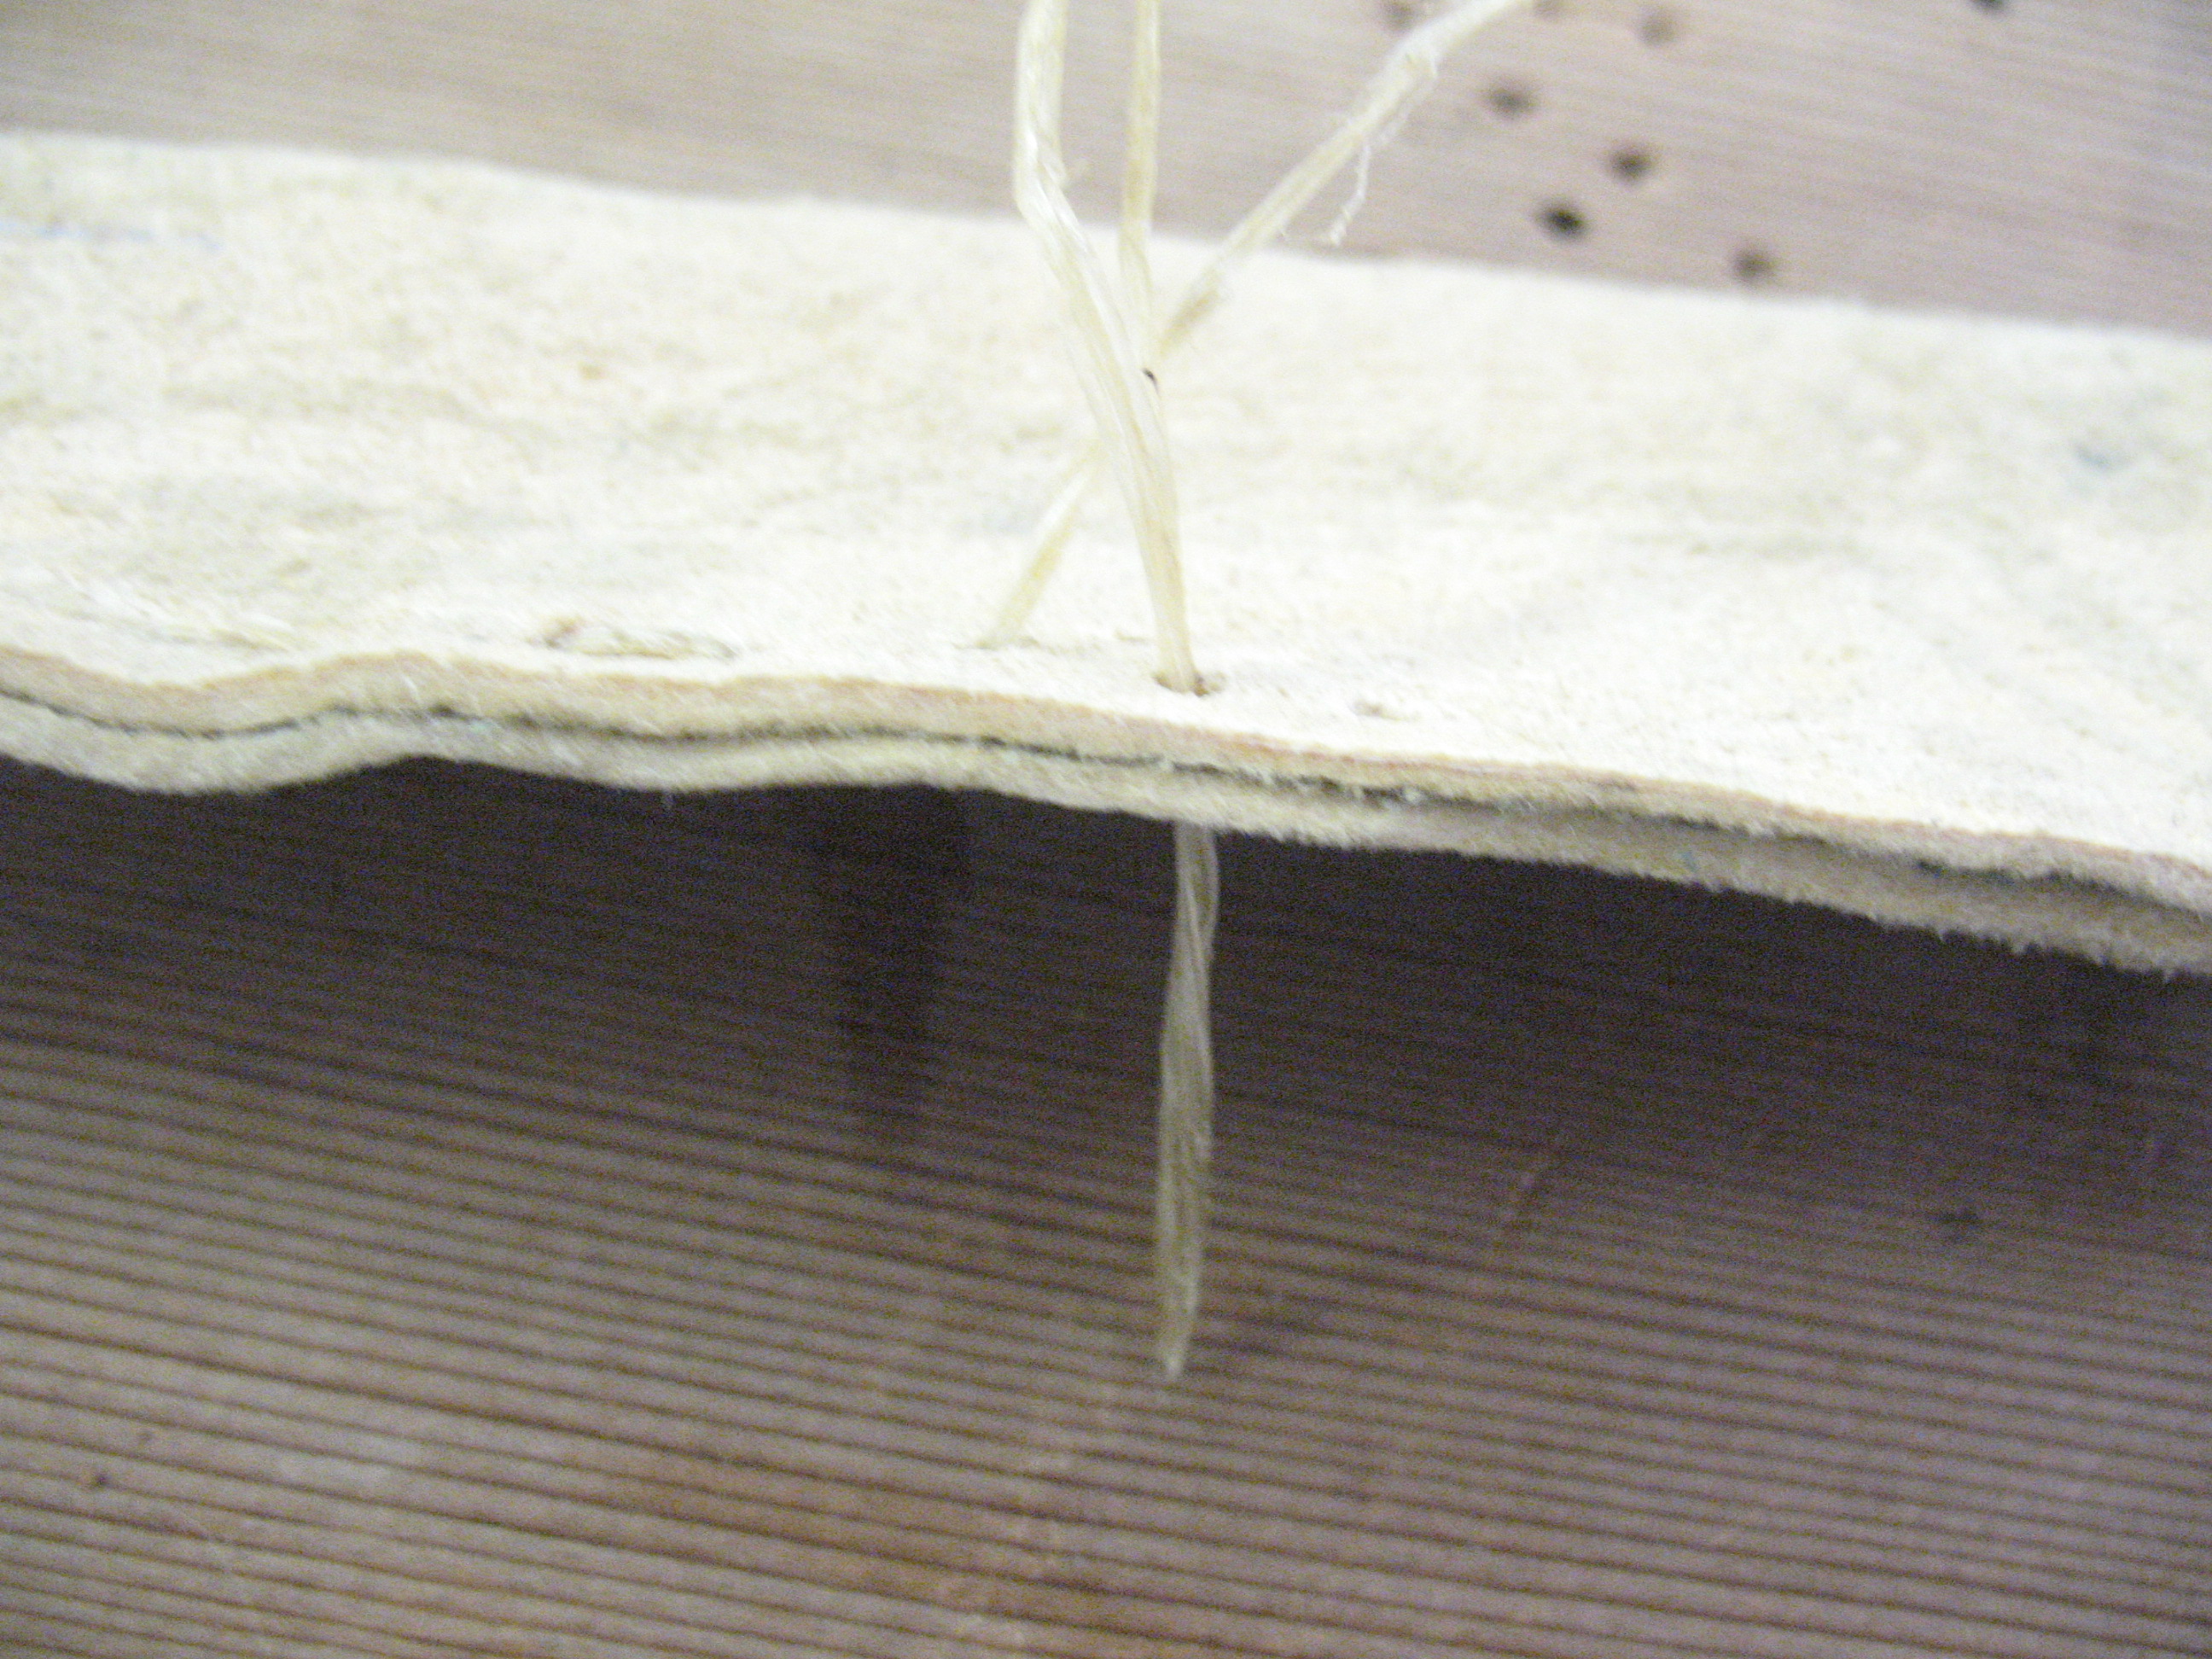 How to Sew with Real Sinew